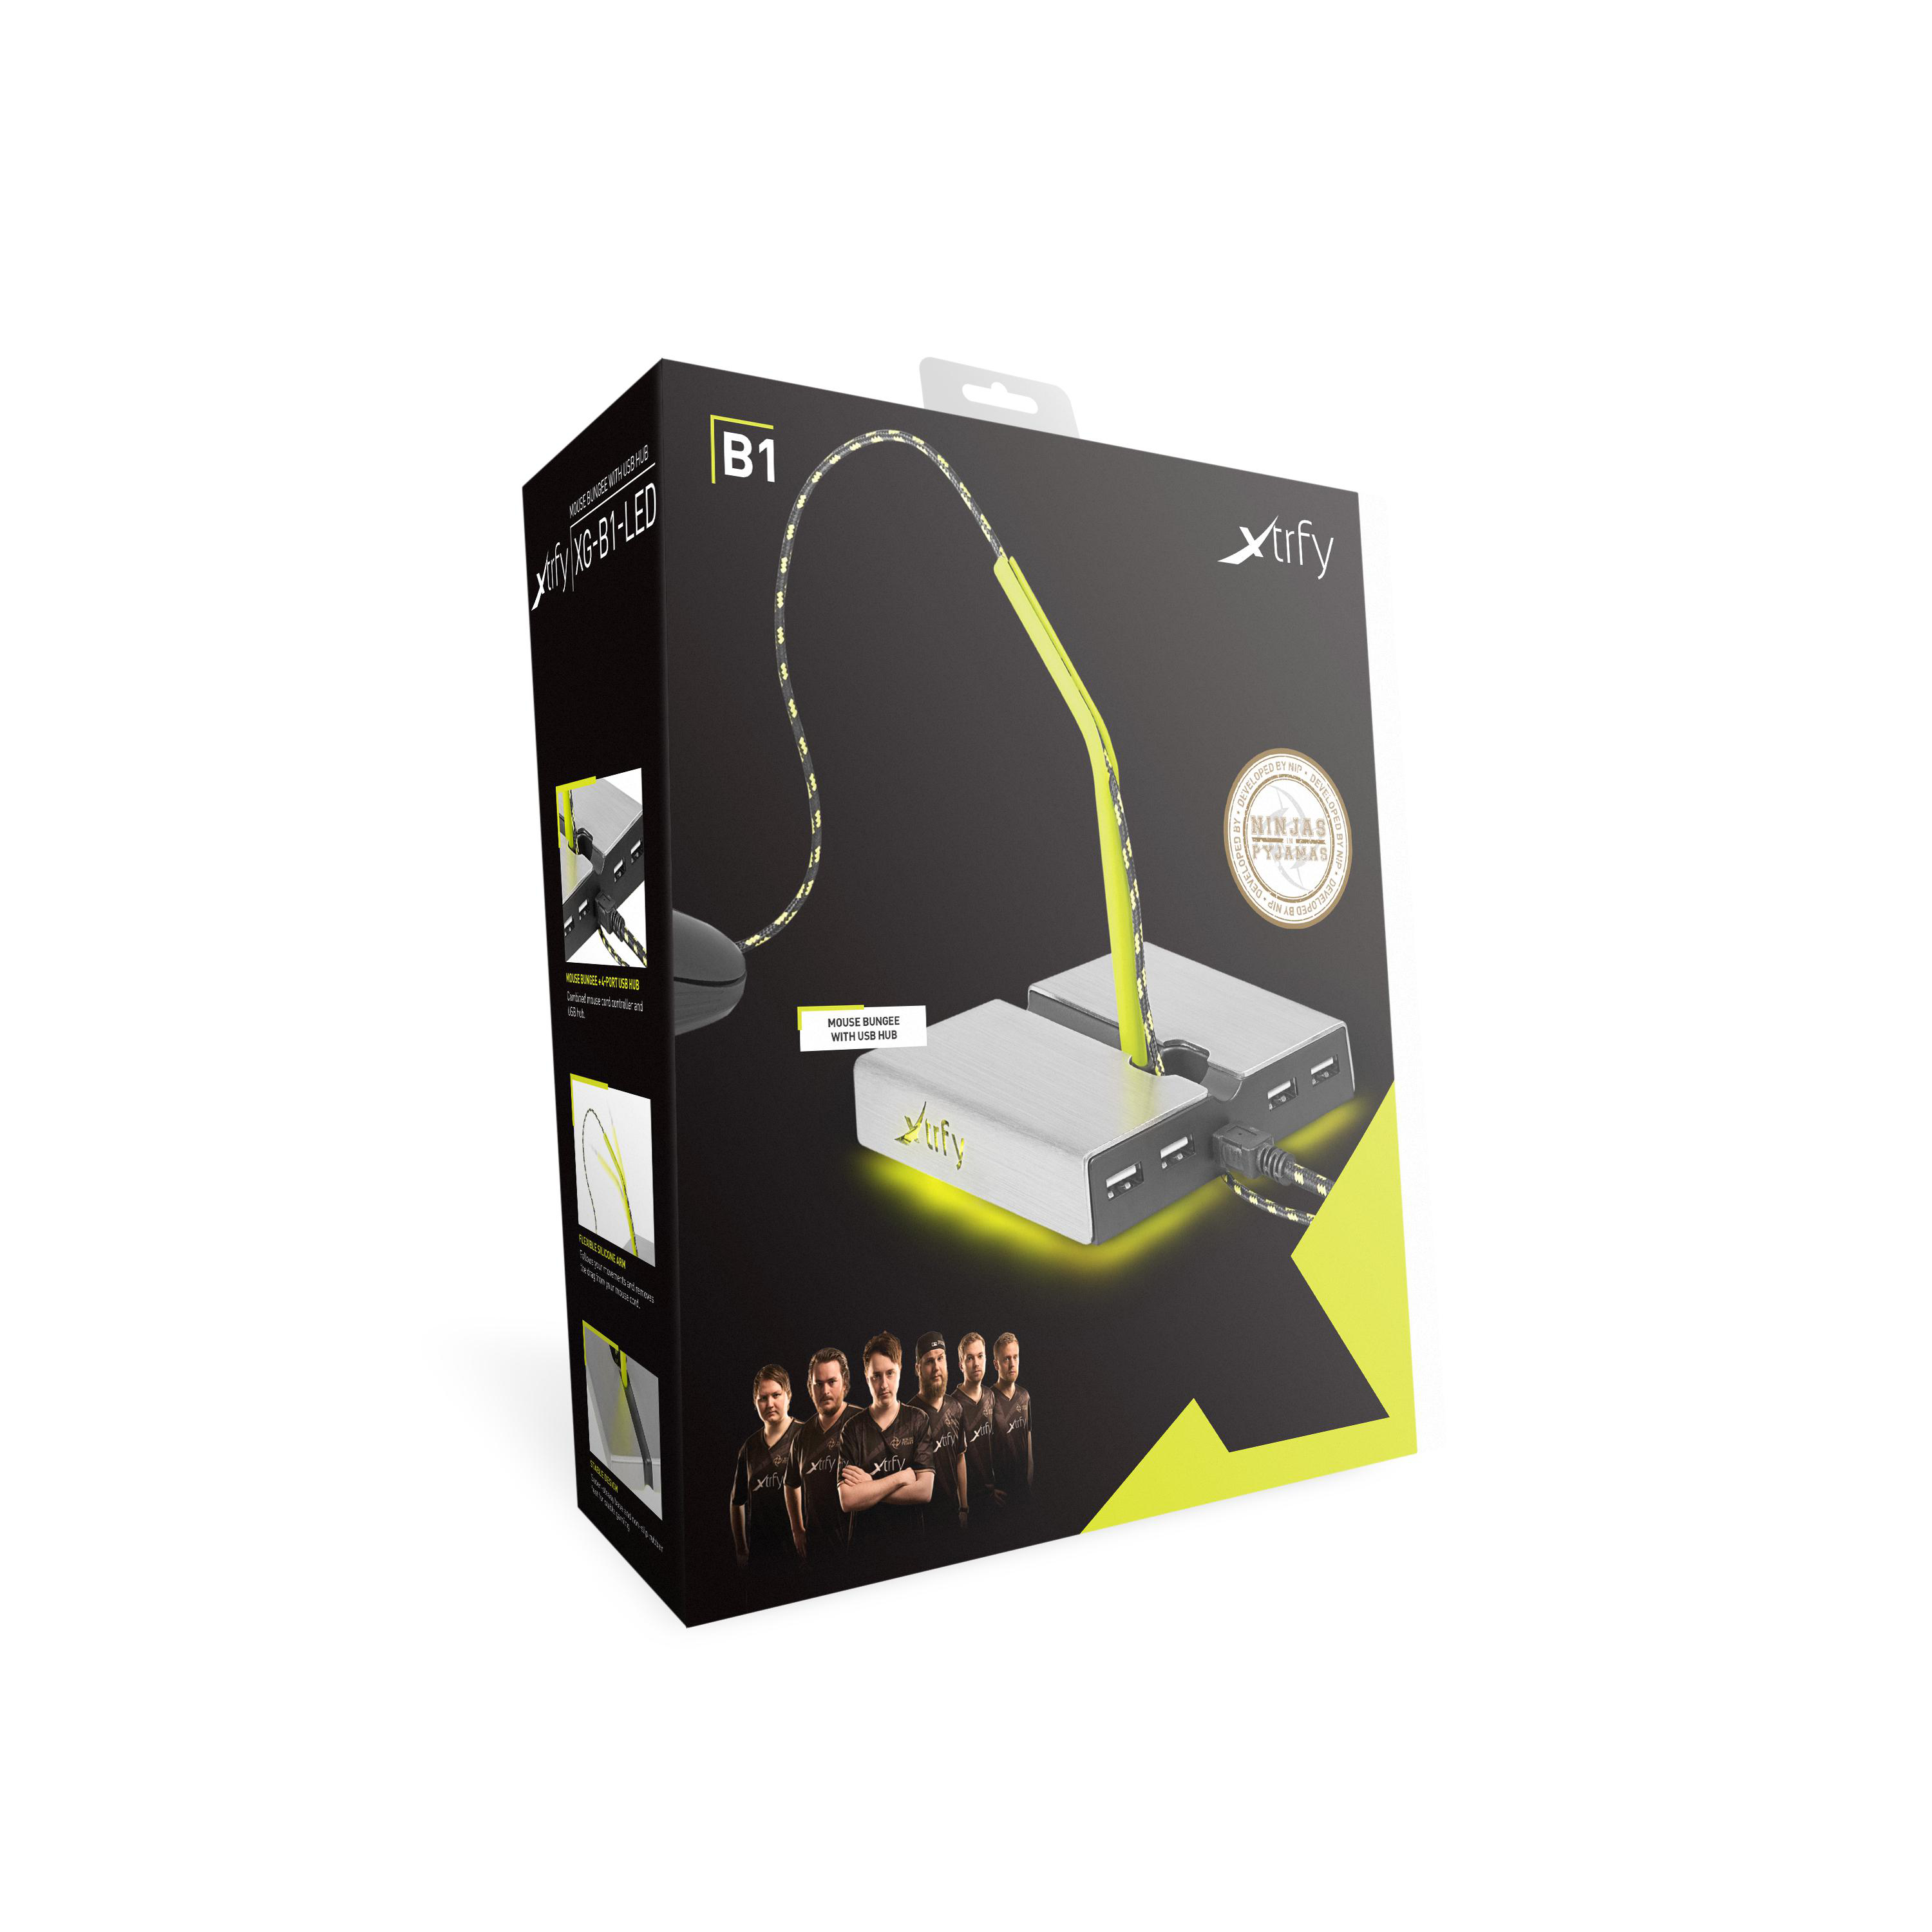 CHERRY XTRFY B1, Silber / Gelb Bungee, Mouse